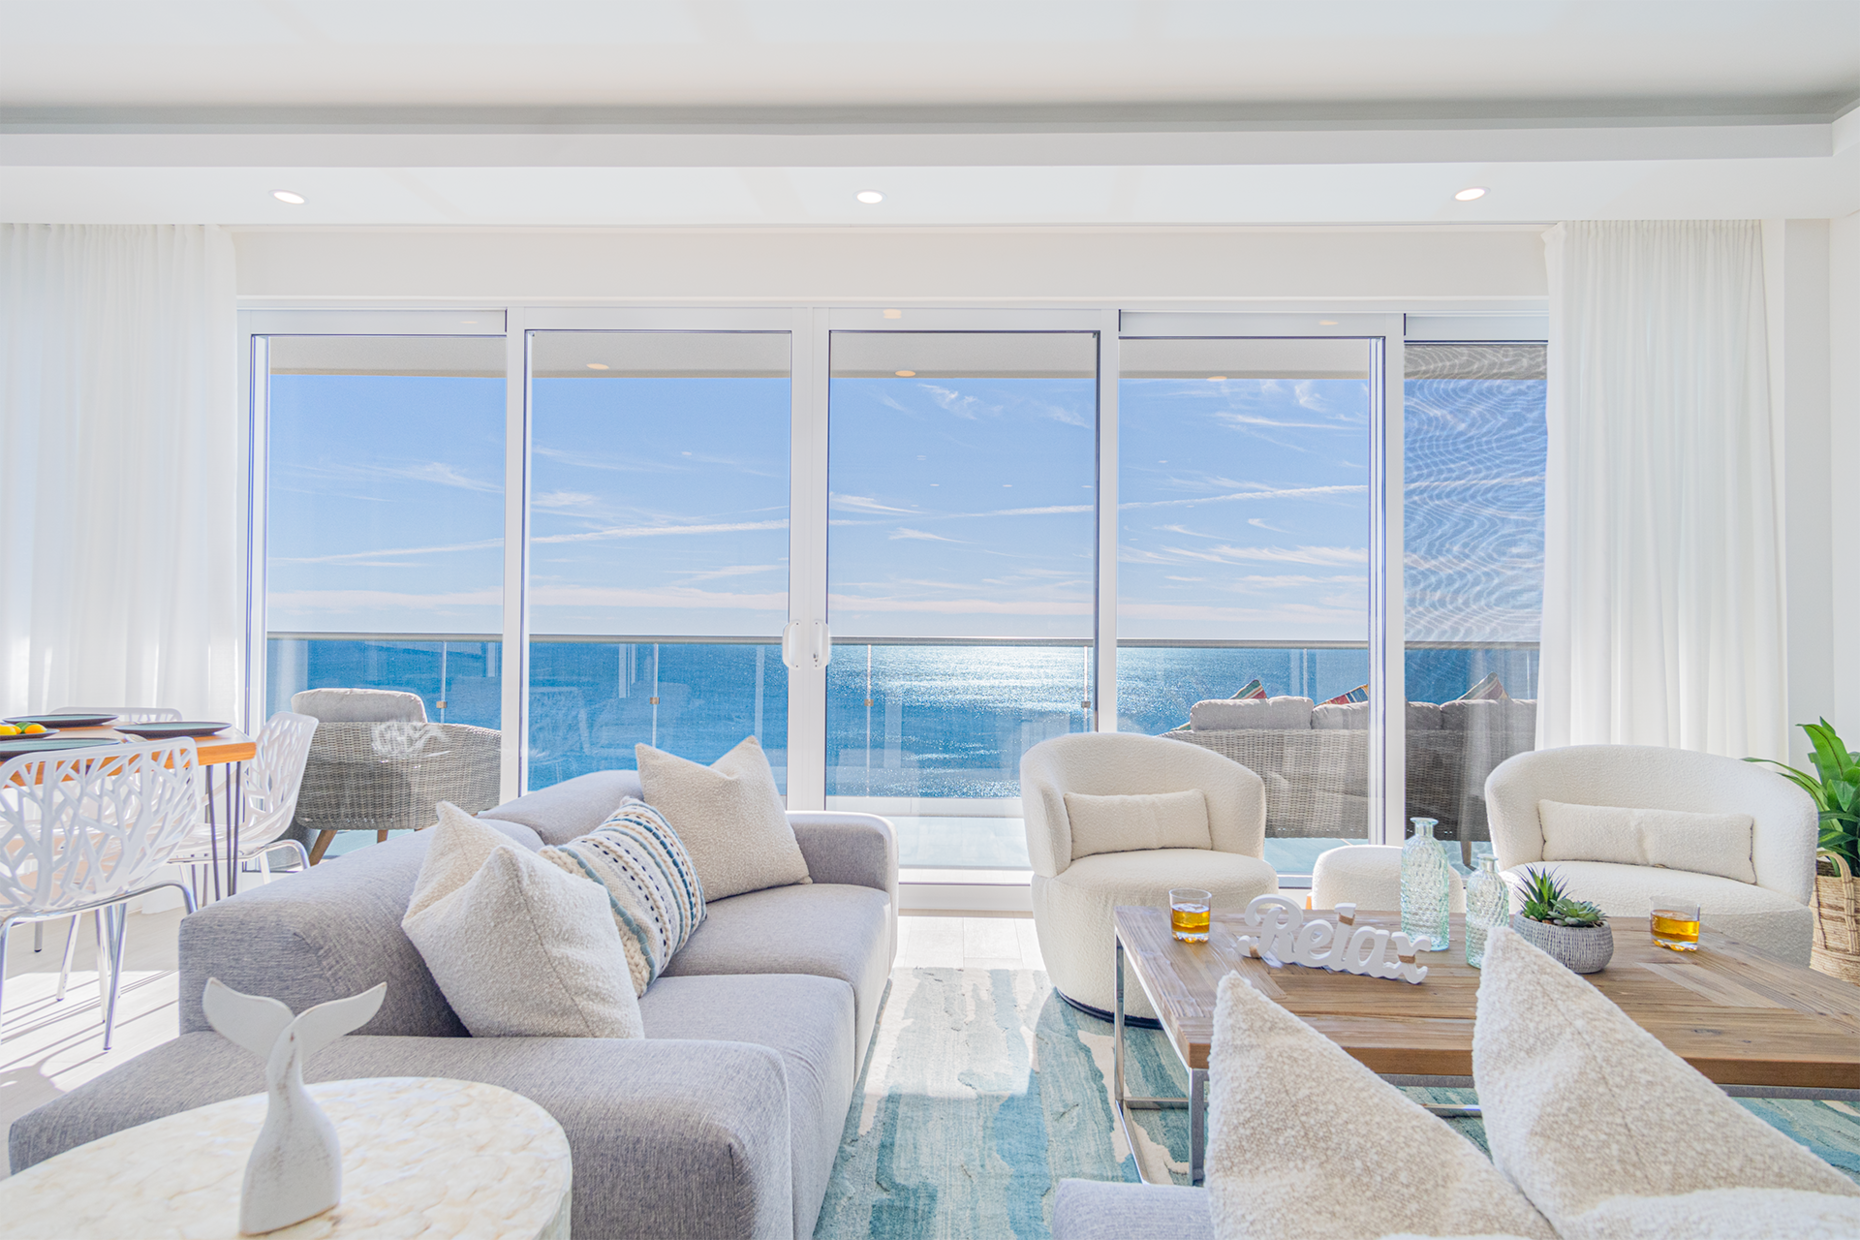 Expansive windows provide plenty of outstanding views.